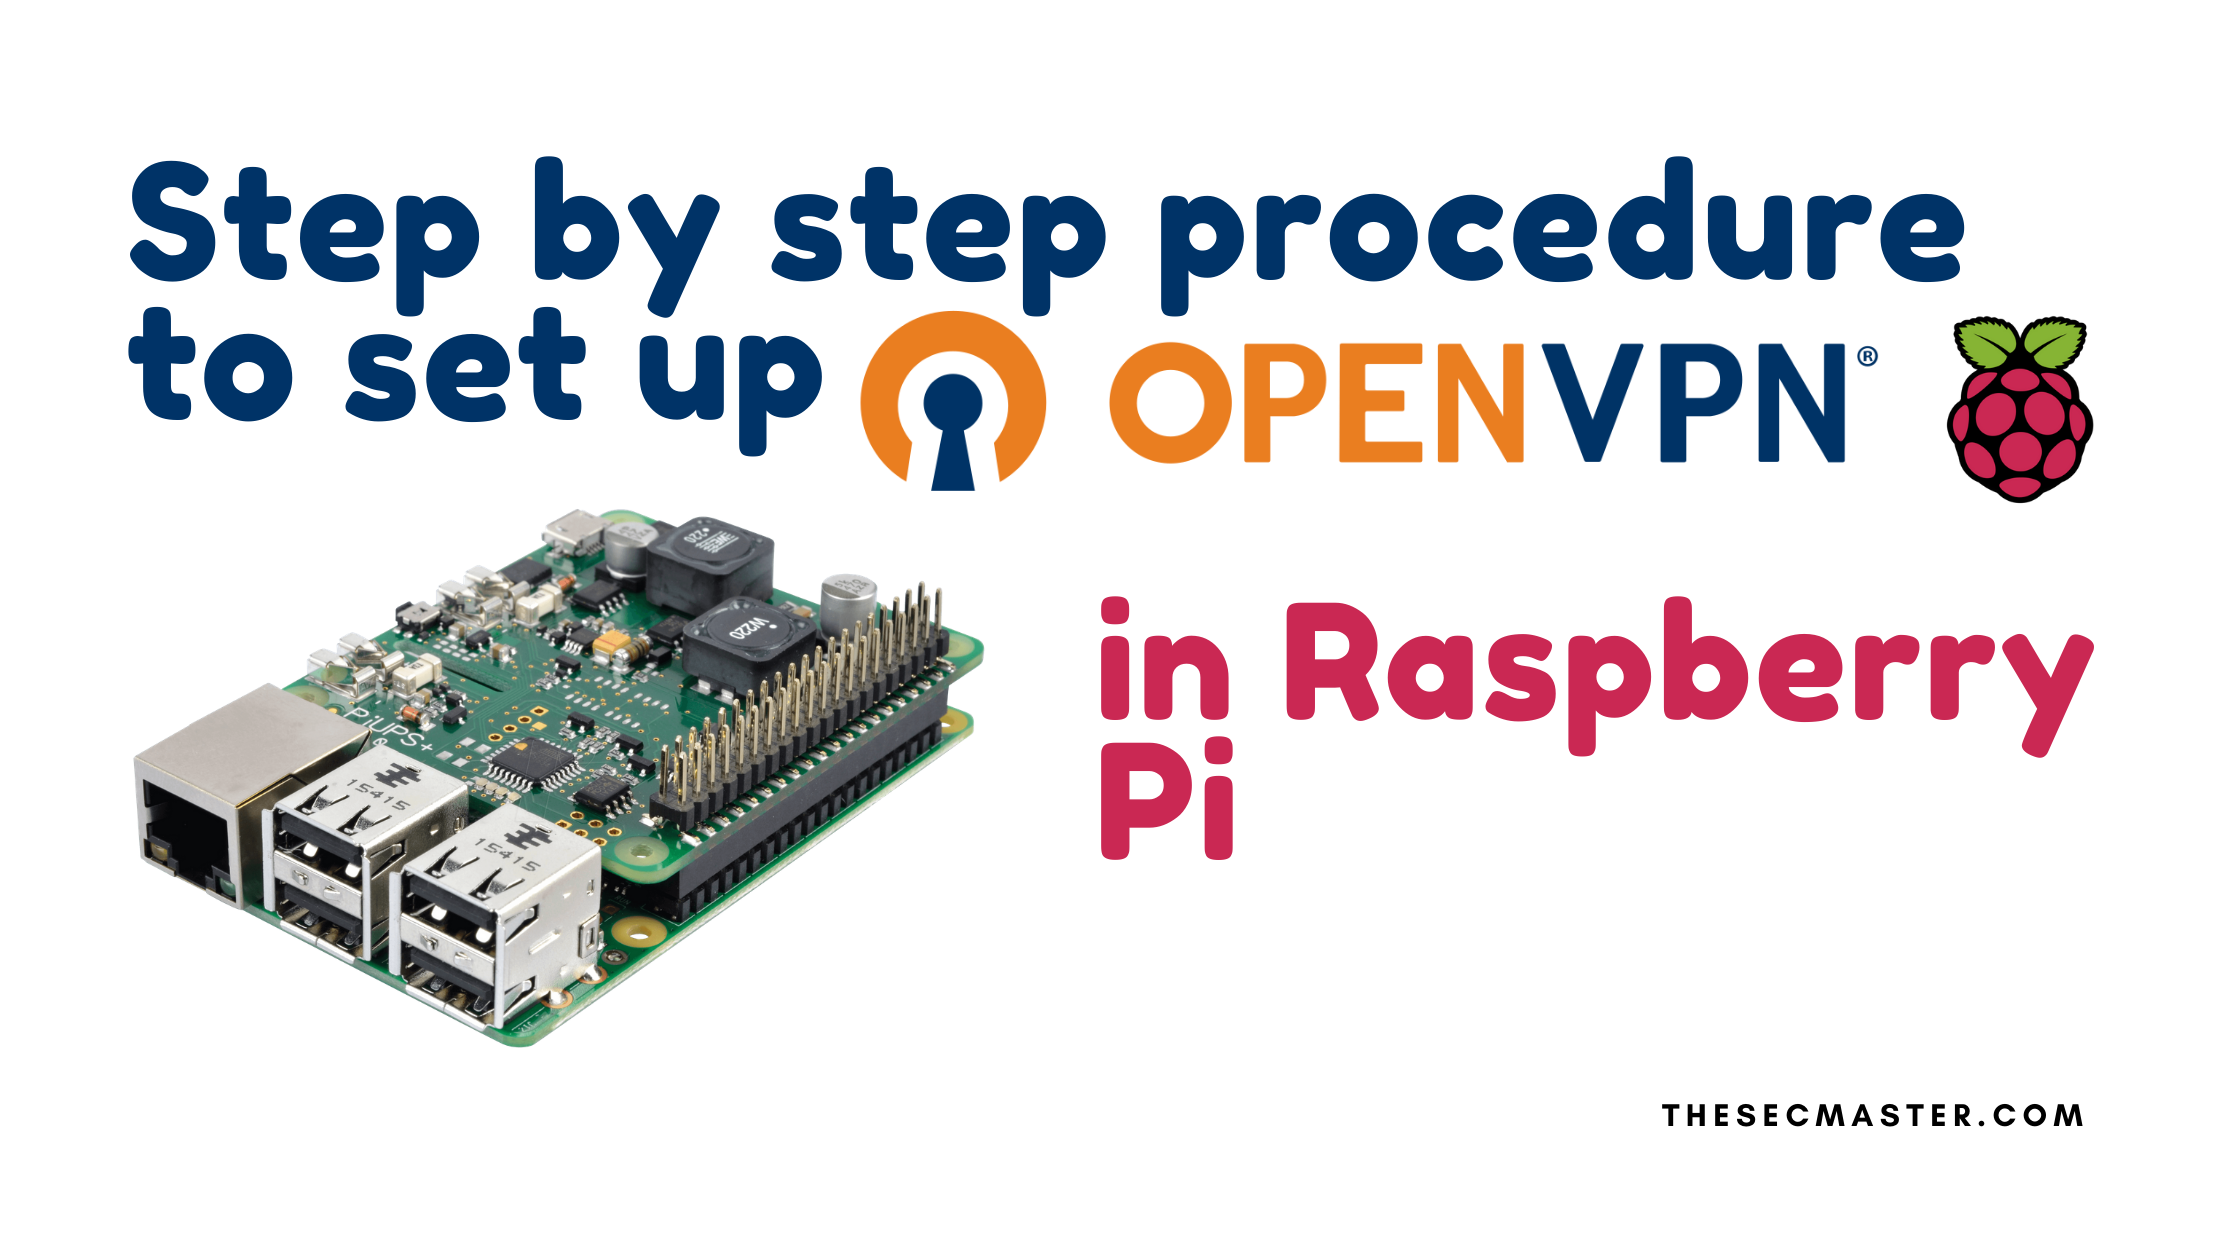 Step By Step Procedure To Set Up Openvpn In Raspberry Pi